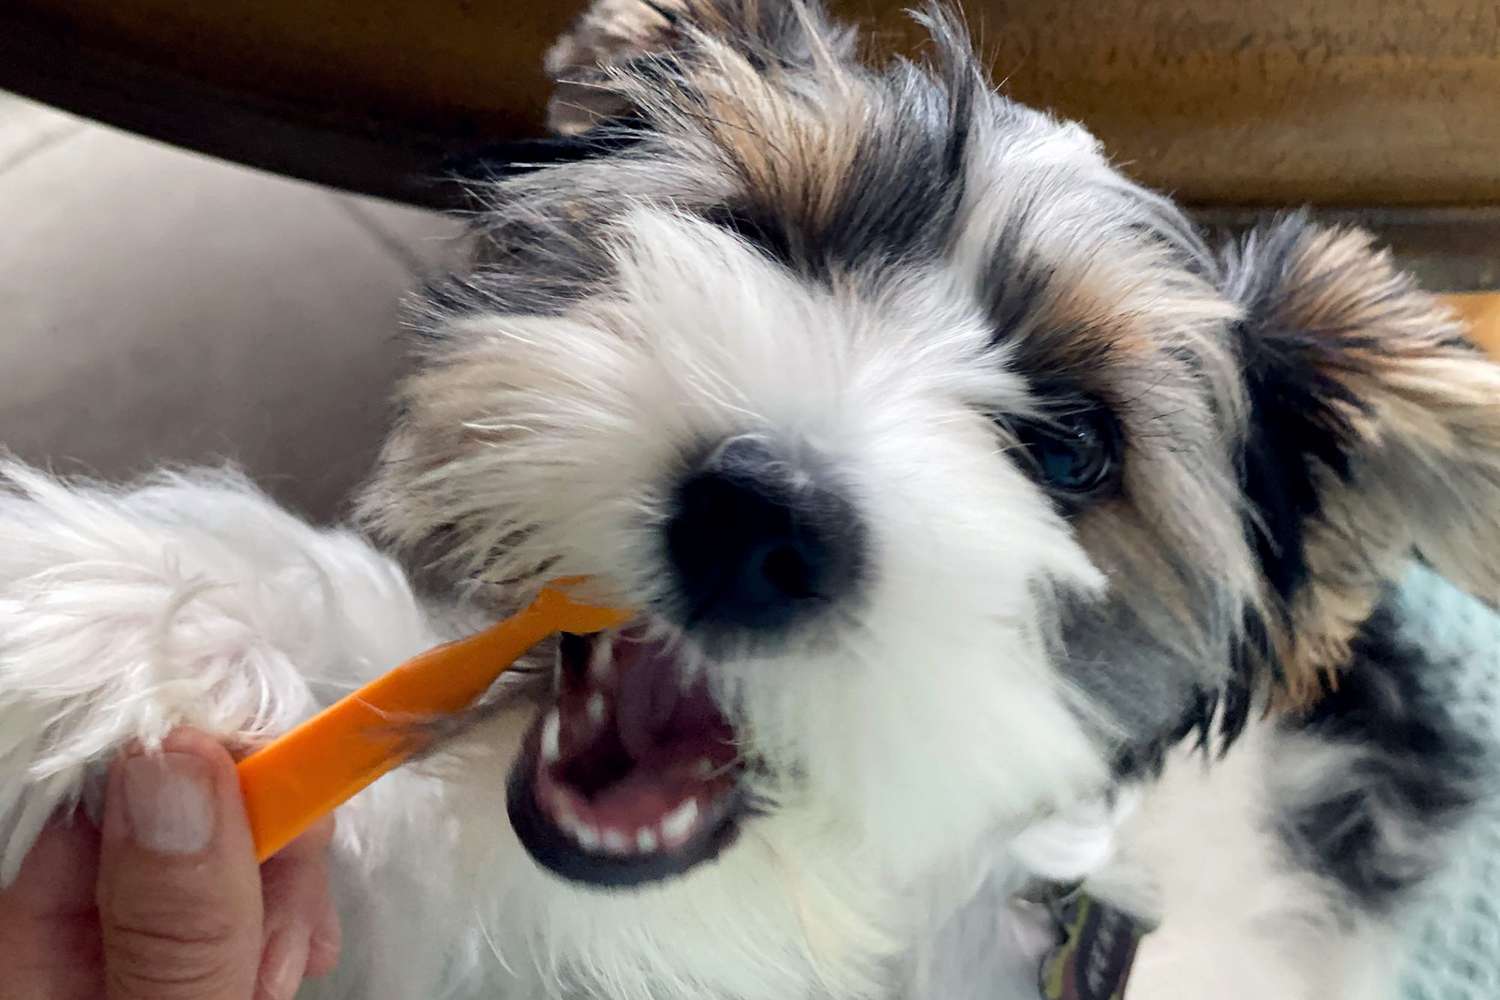 fluffy dog gets teeth brushed with orange toothbrush